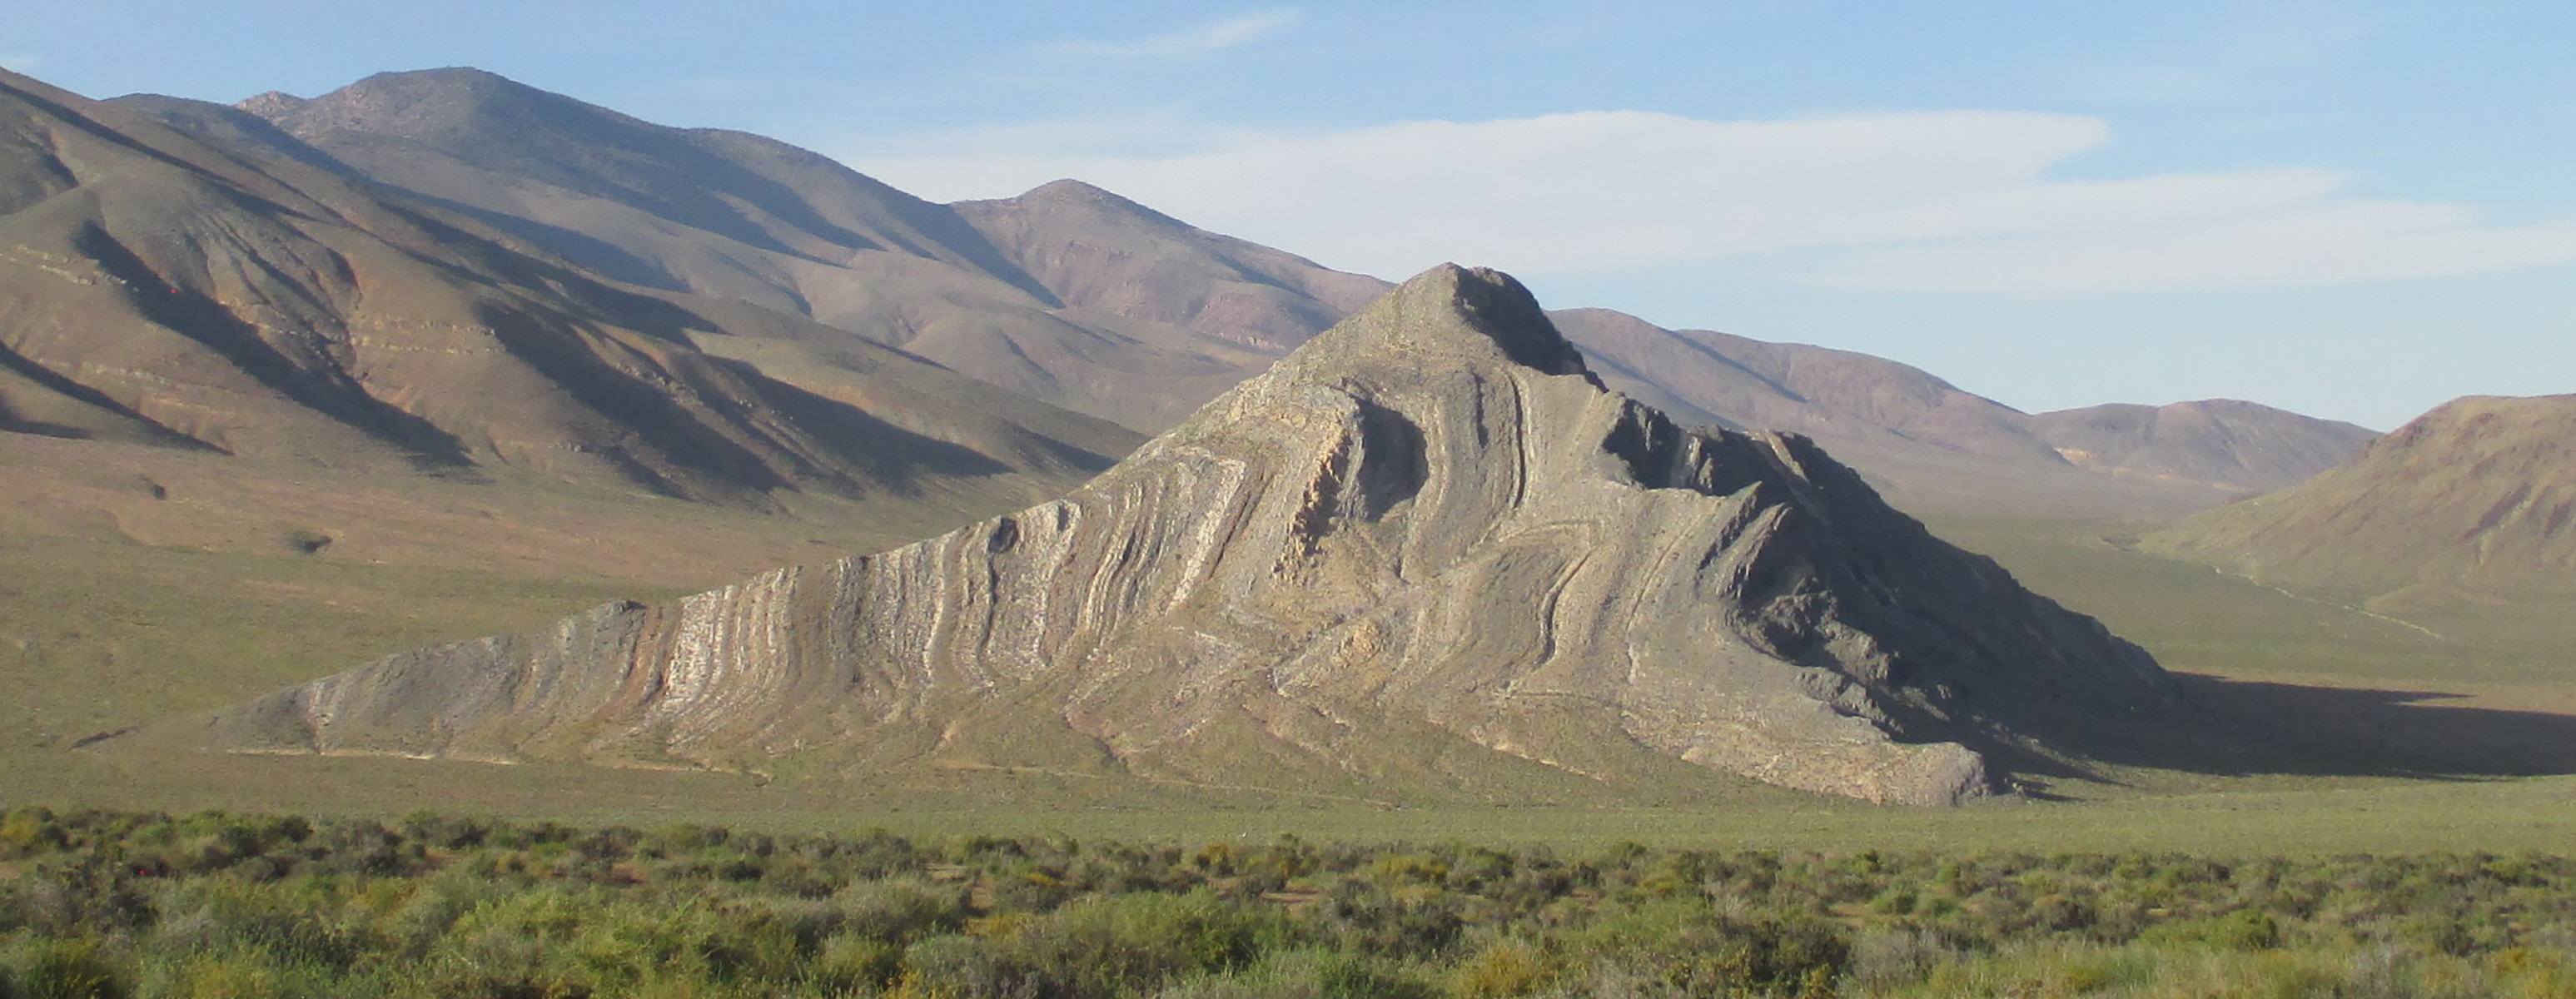 A striped butte stands in the middle of a green valley with shrubs in the foreground and rolling mountains in the background.